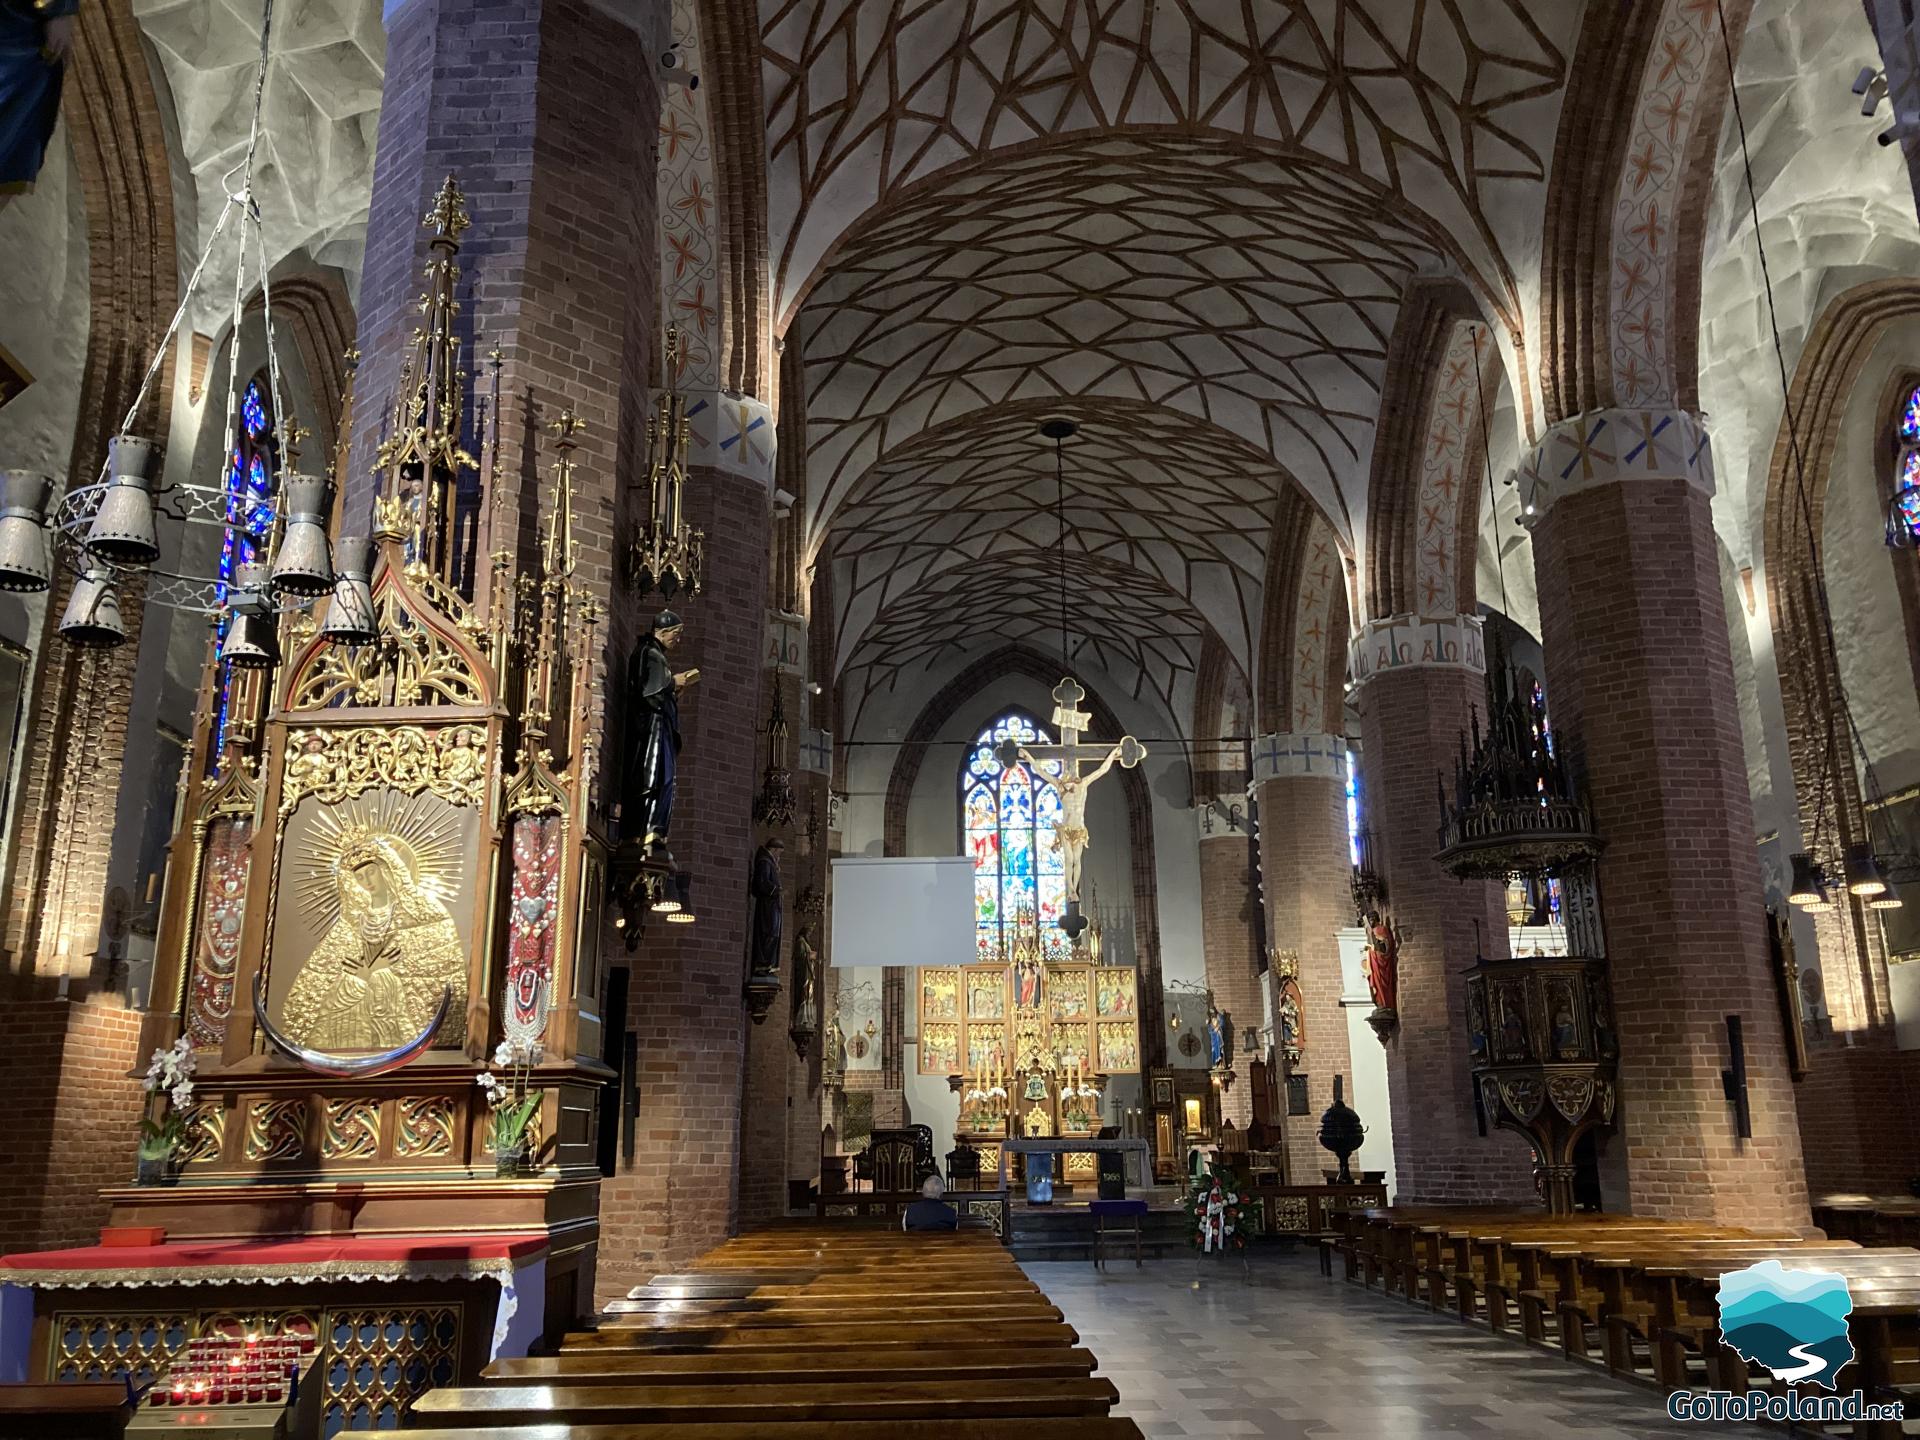 the interior of the cathedral